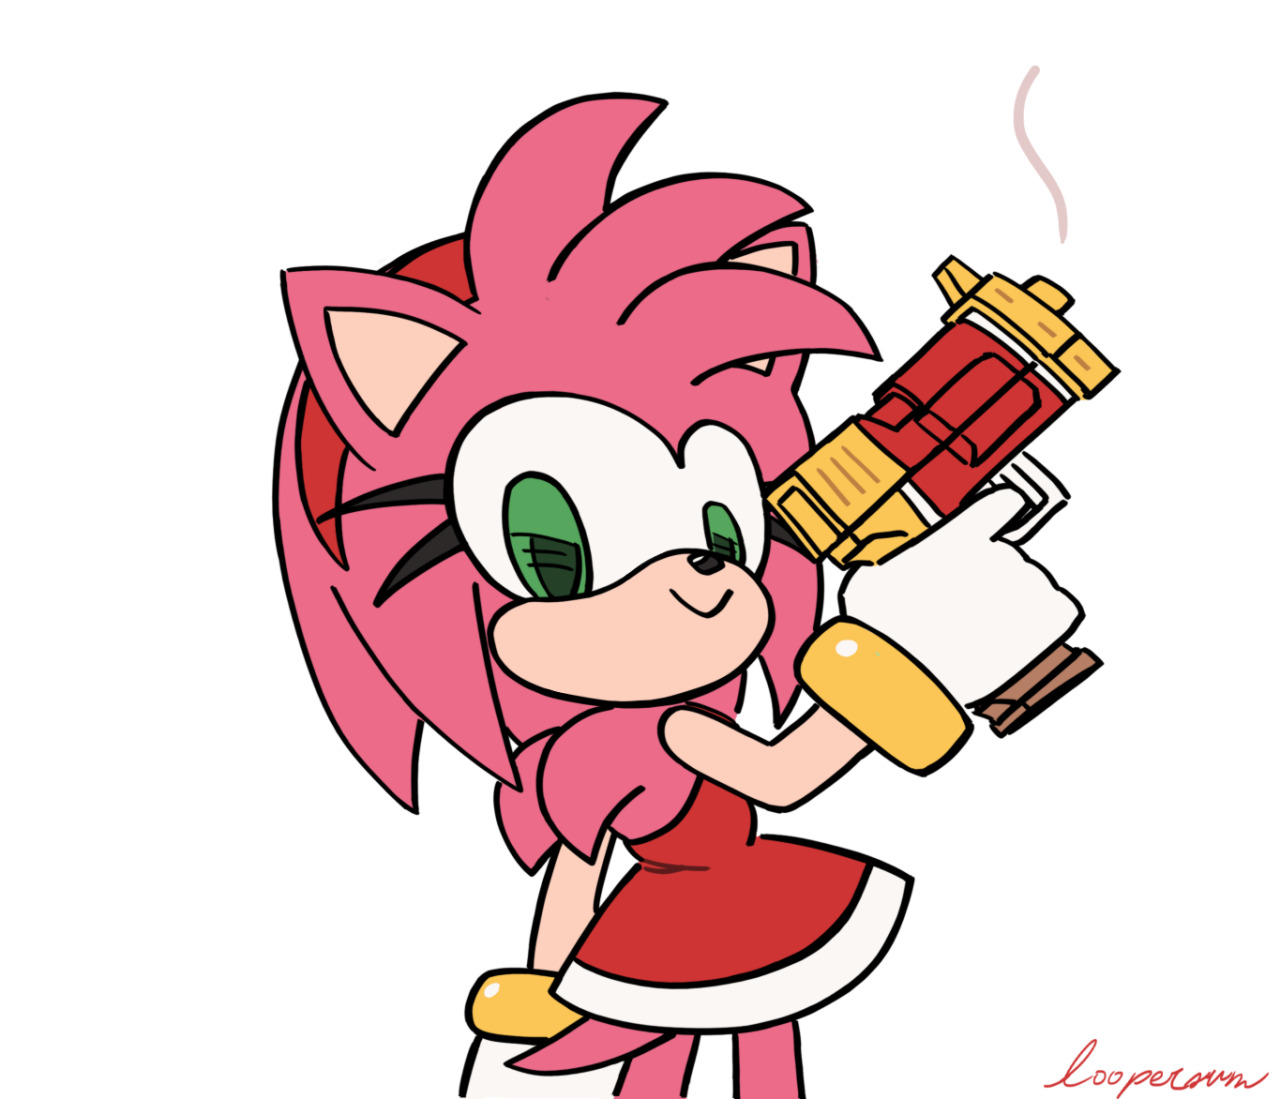 Piko Piko Handgun #amy#amy rose#sonic#sonic adventure #sonic the hedgehog  #oh my god zero look out